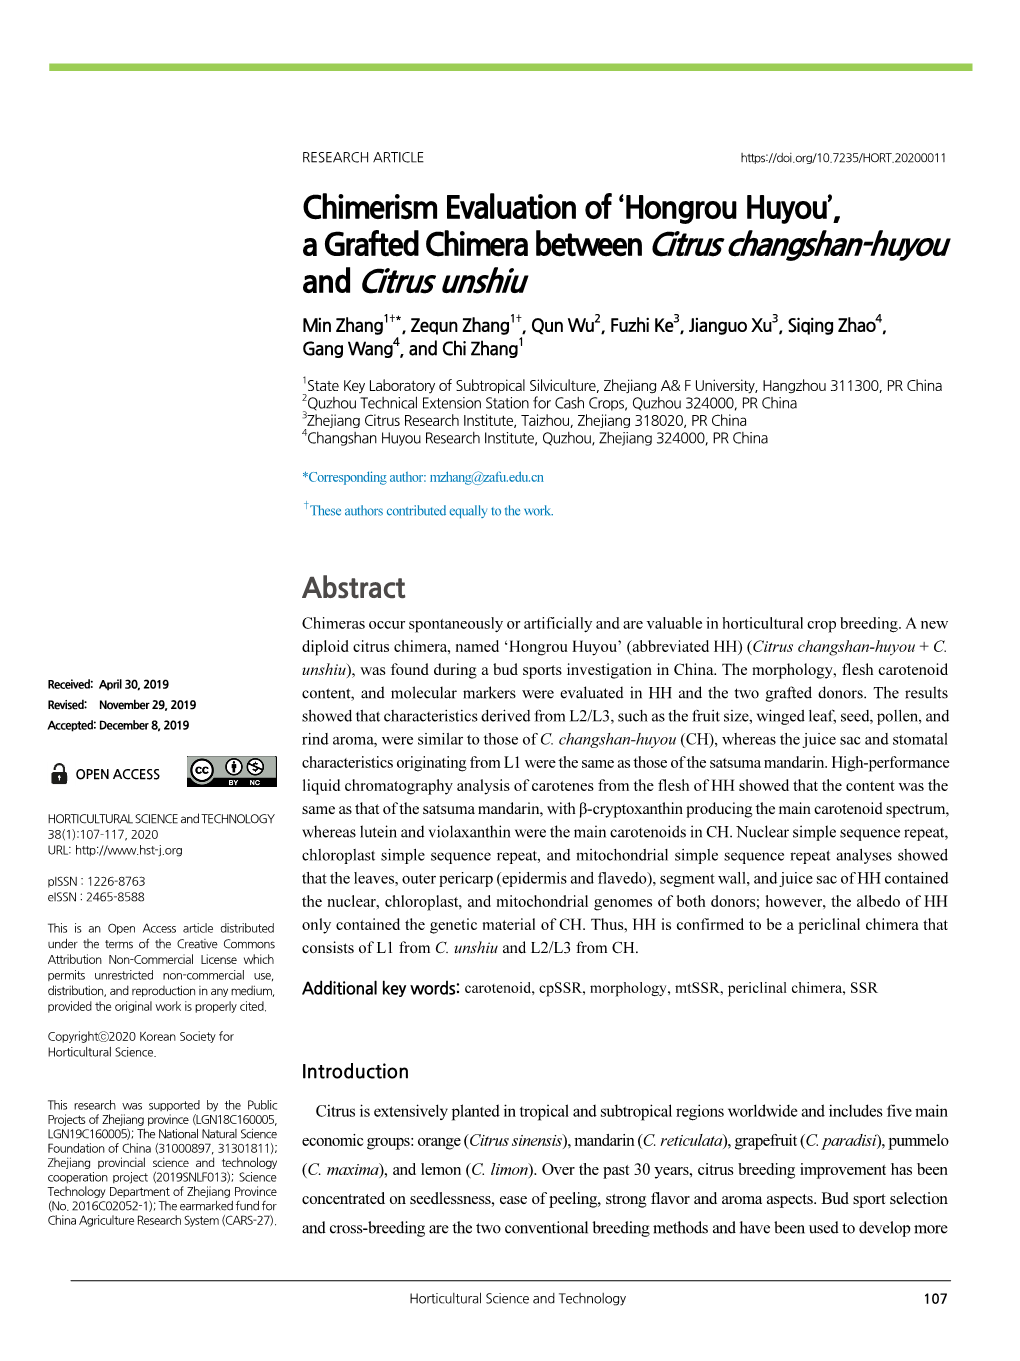 Chimerism Evaluation of 'Hongrou Huyou', a Grafted Chimera Between